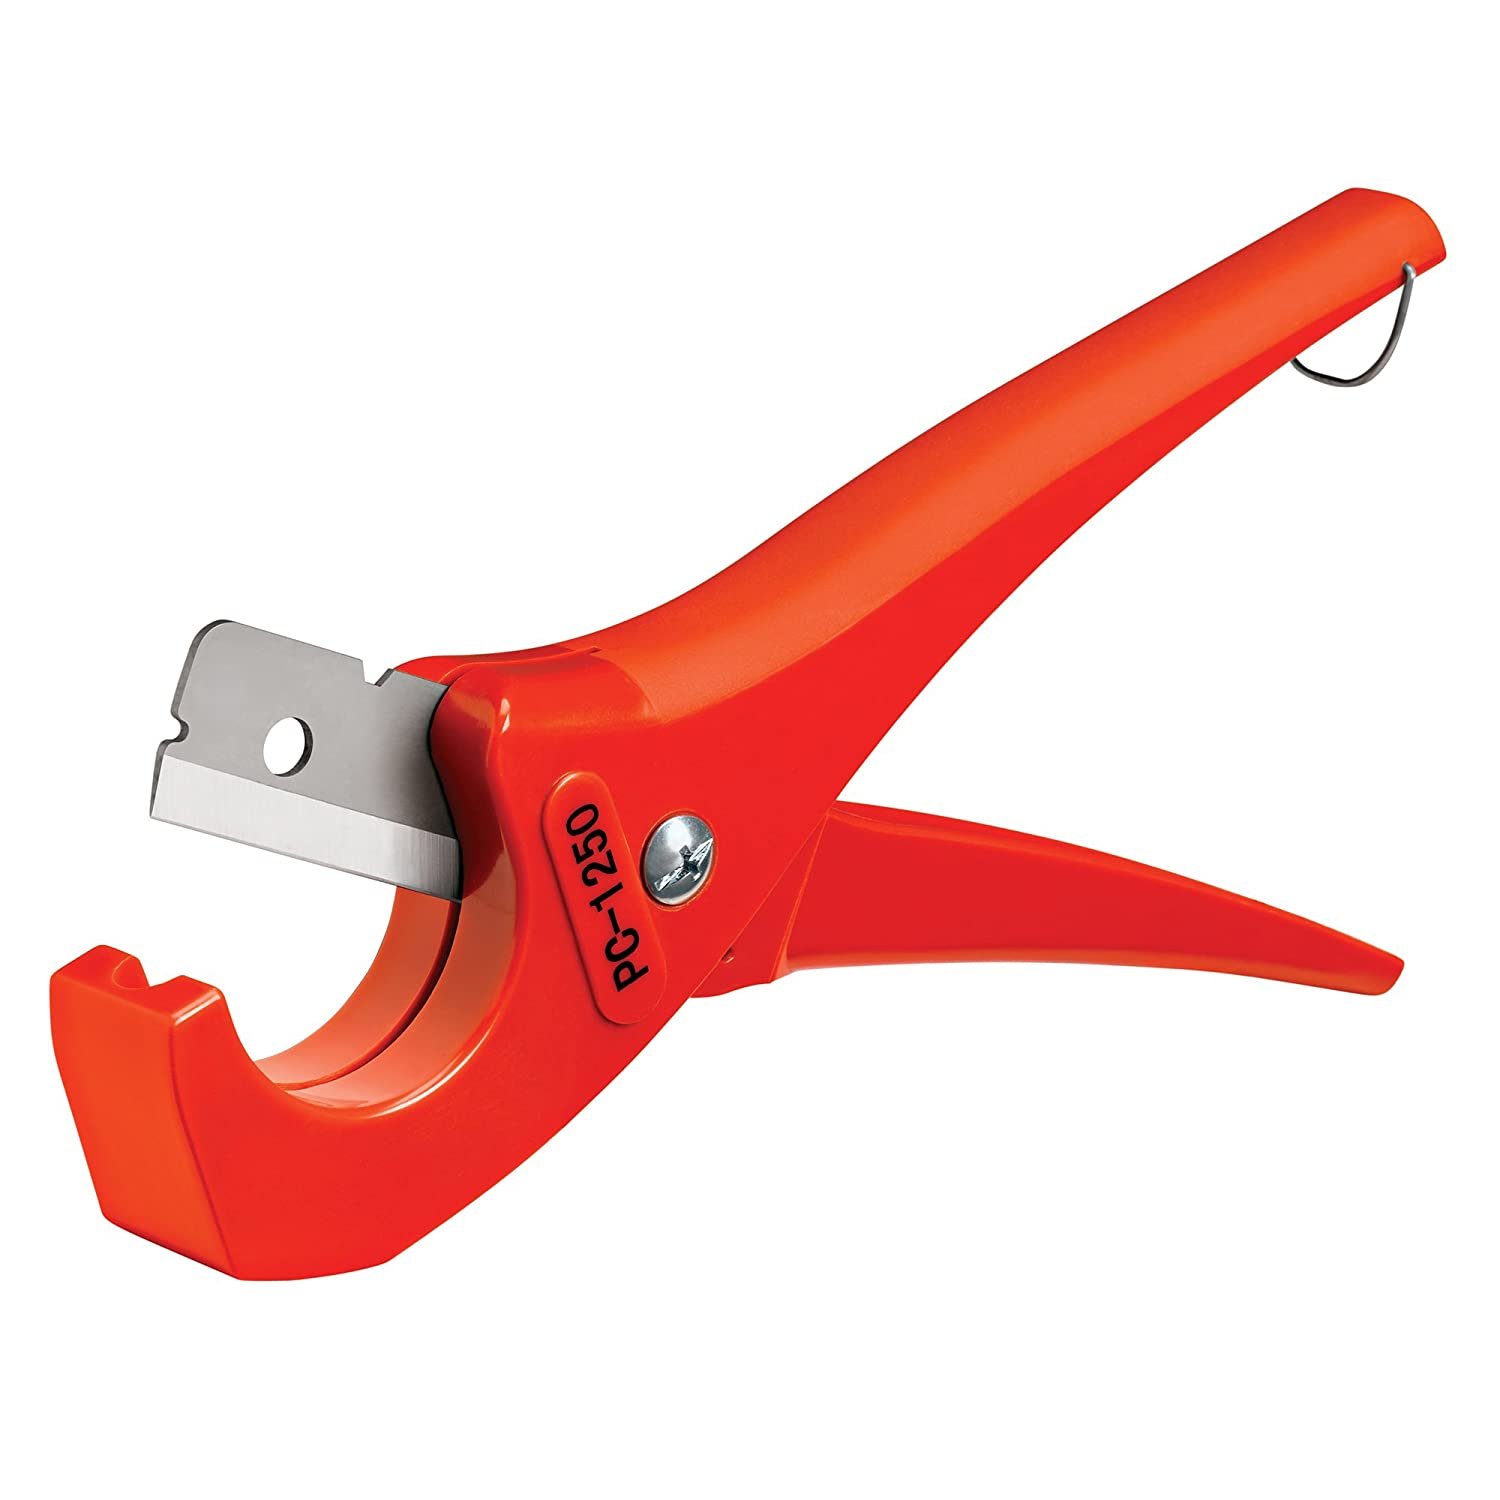 Image of the PVC pipe cutter